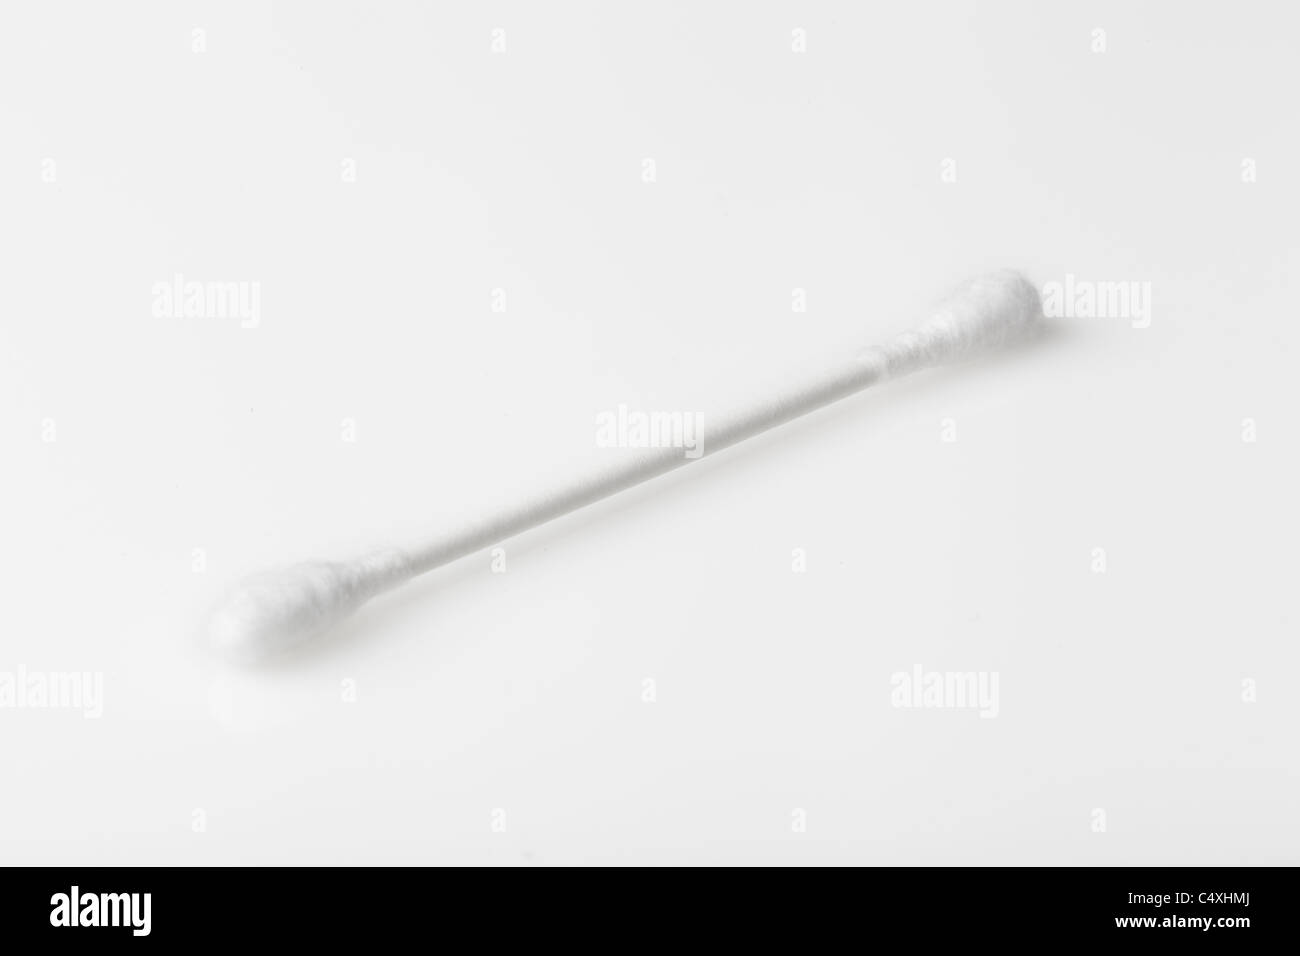 A cotton swab against a white background Stock Photo